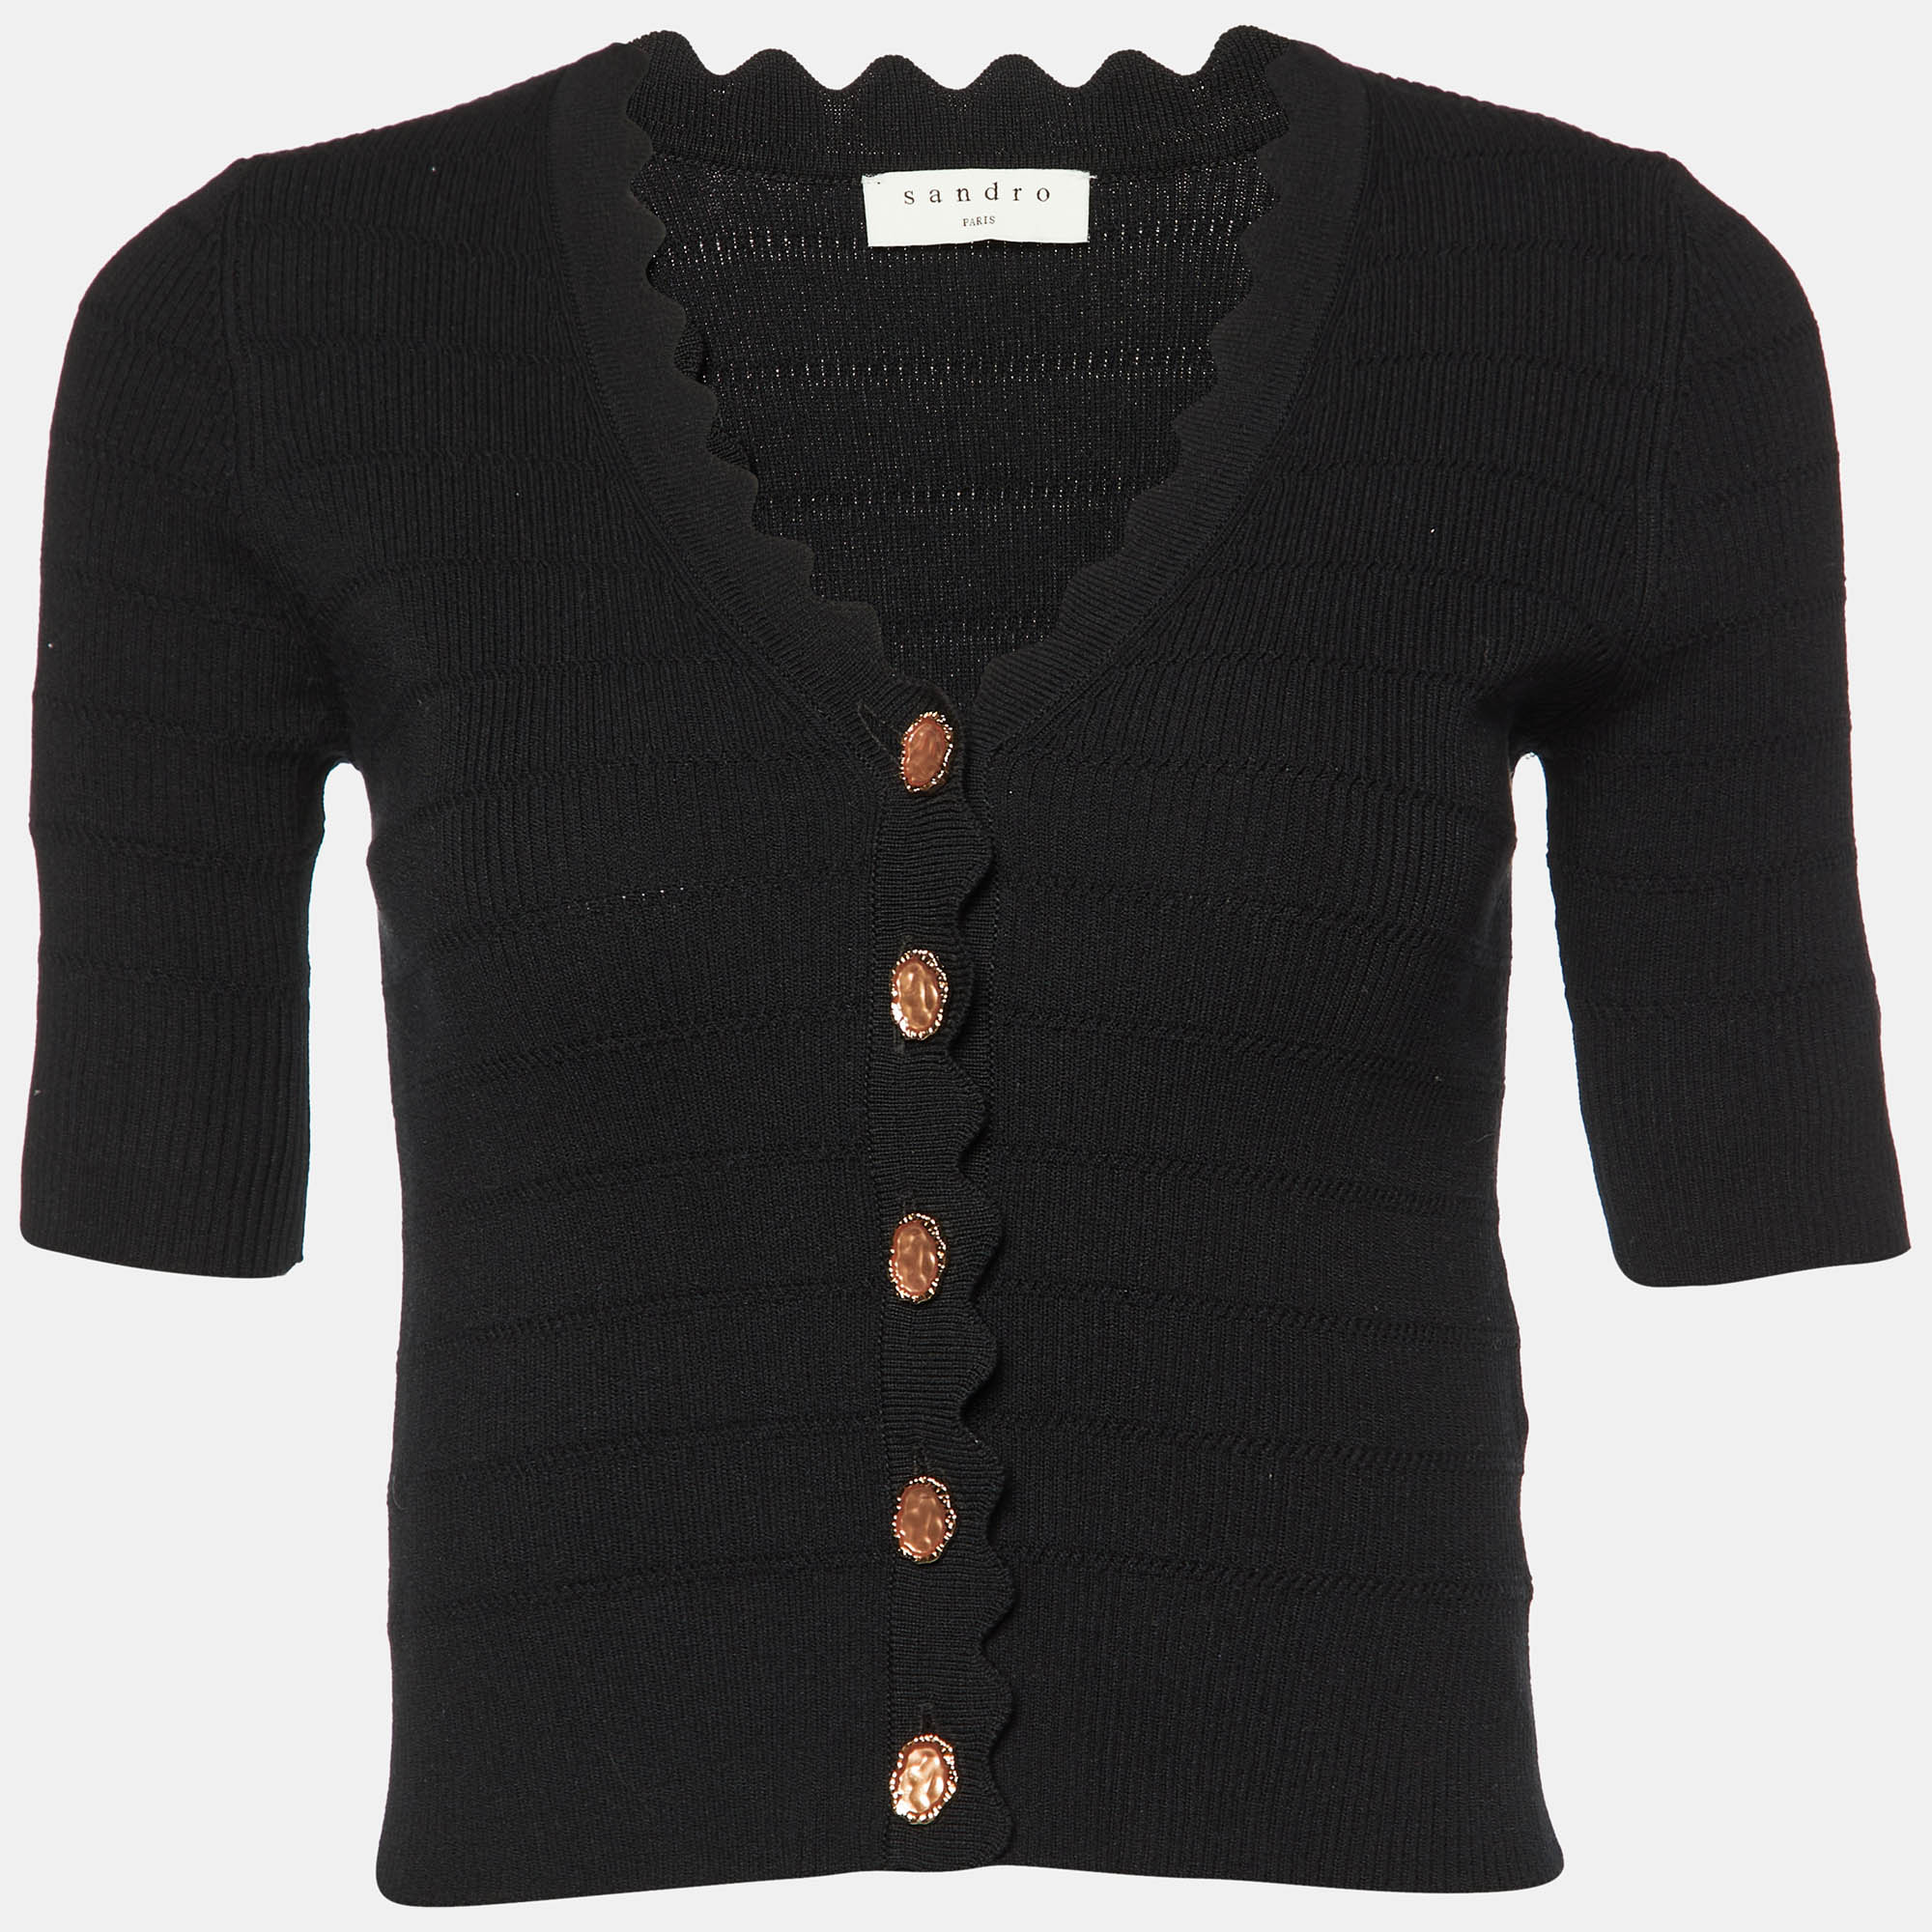 

Sandro Black Knit Cropped Top